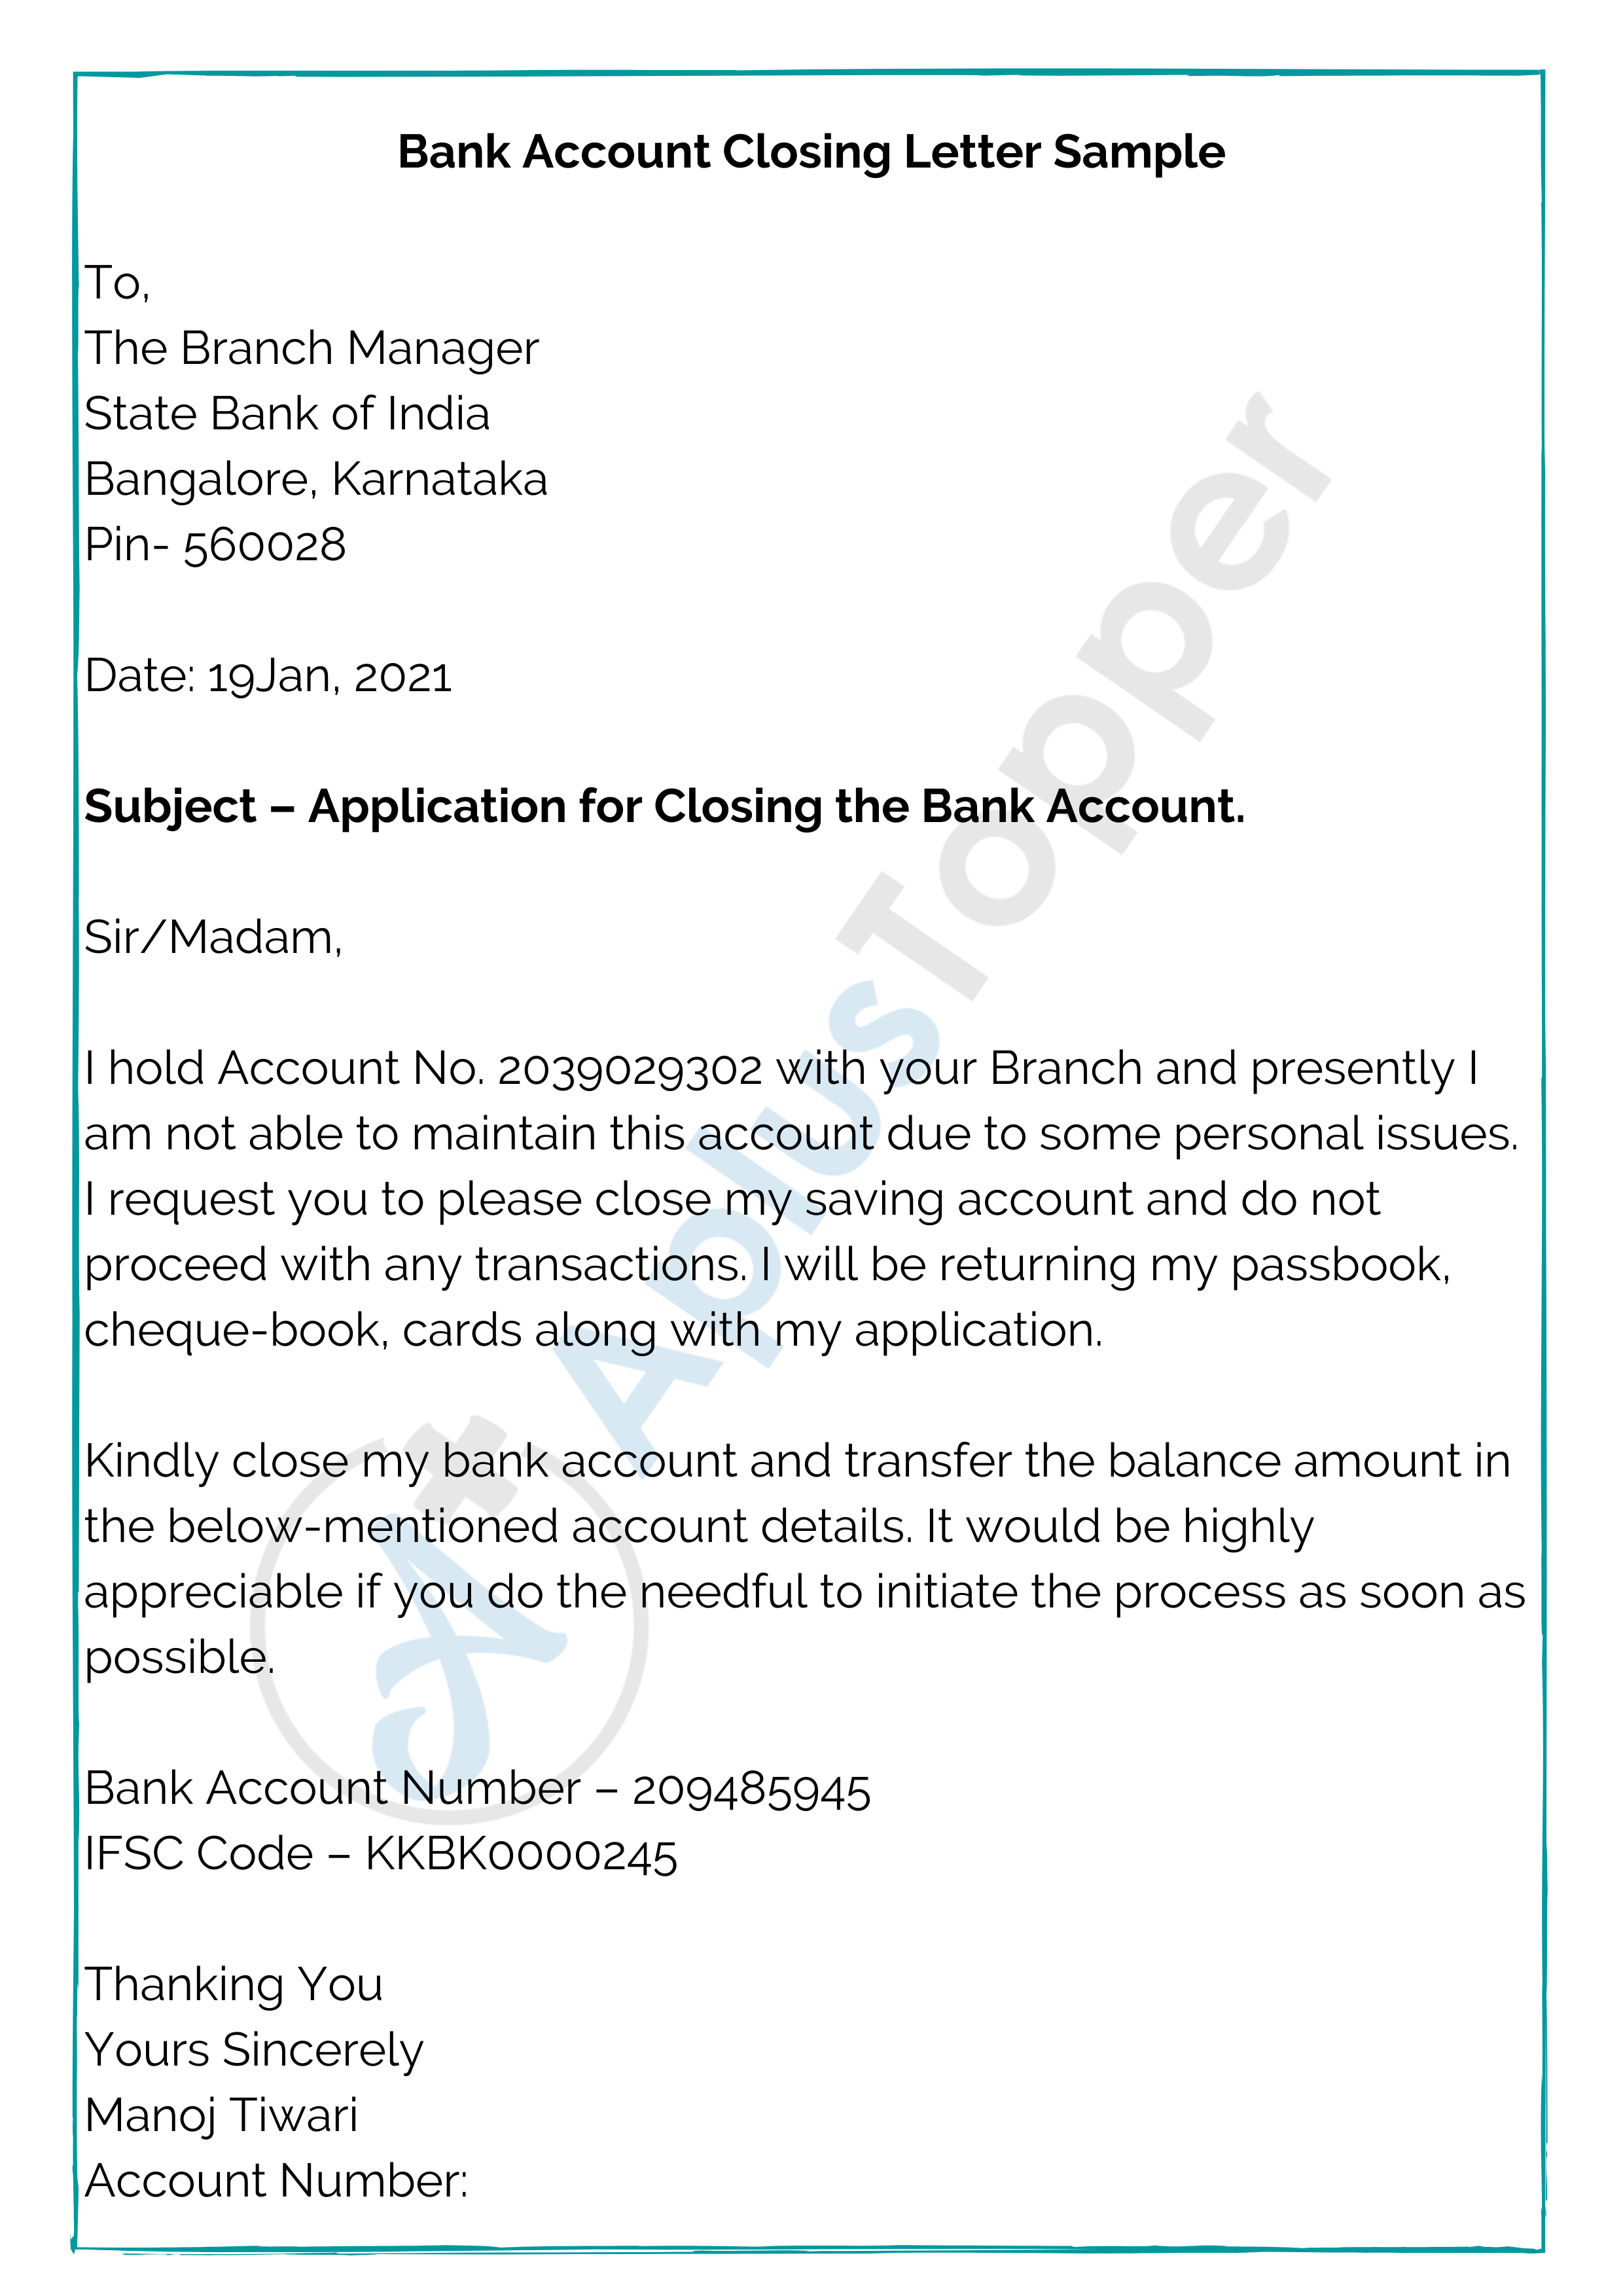 application letter for closing loan account